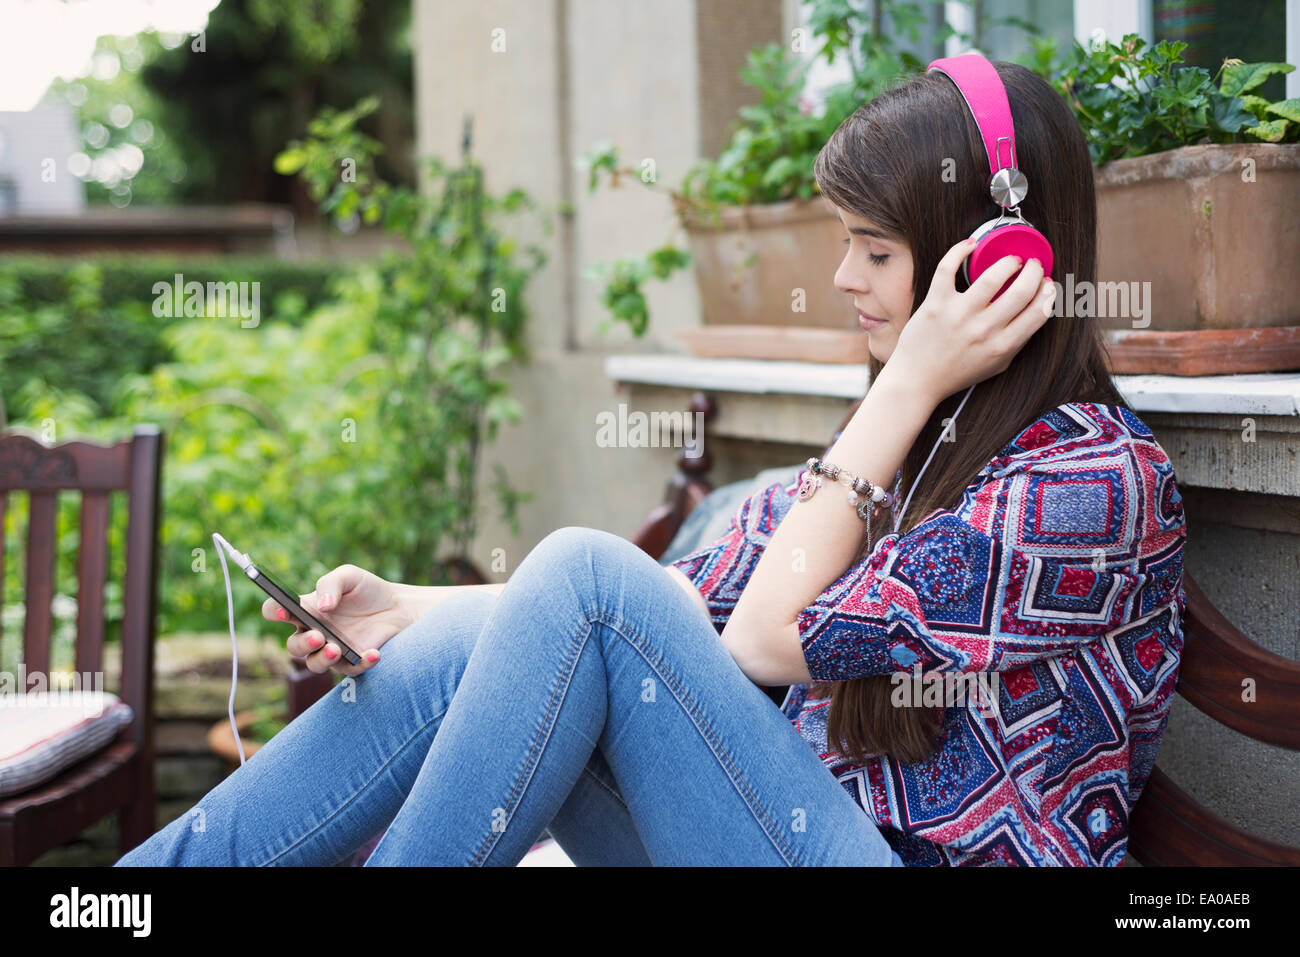 Young woman wearing headphones, listening to music Stock Photo